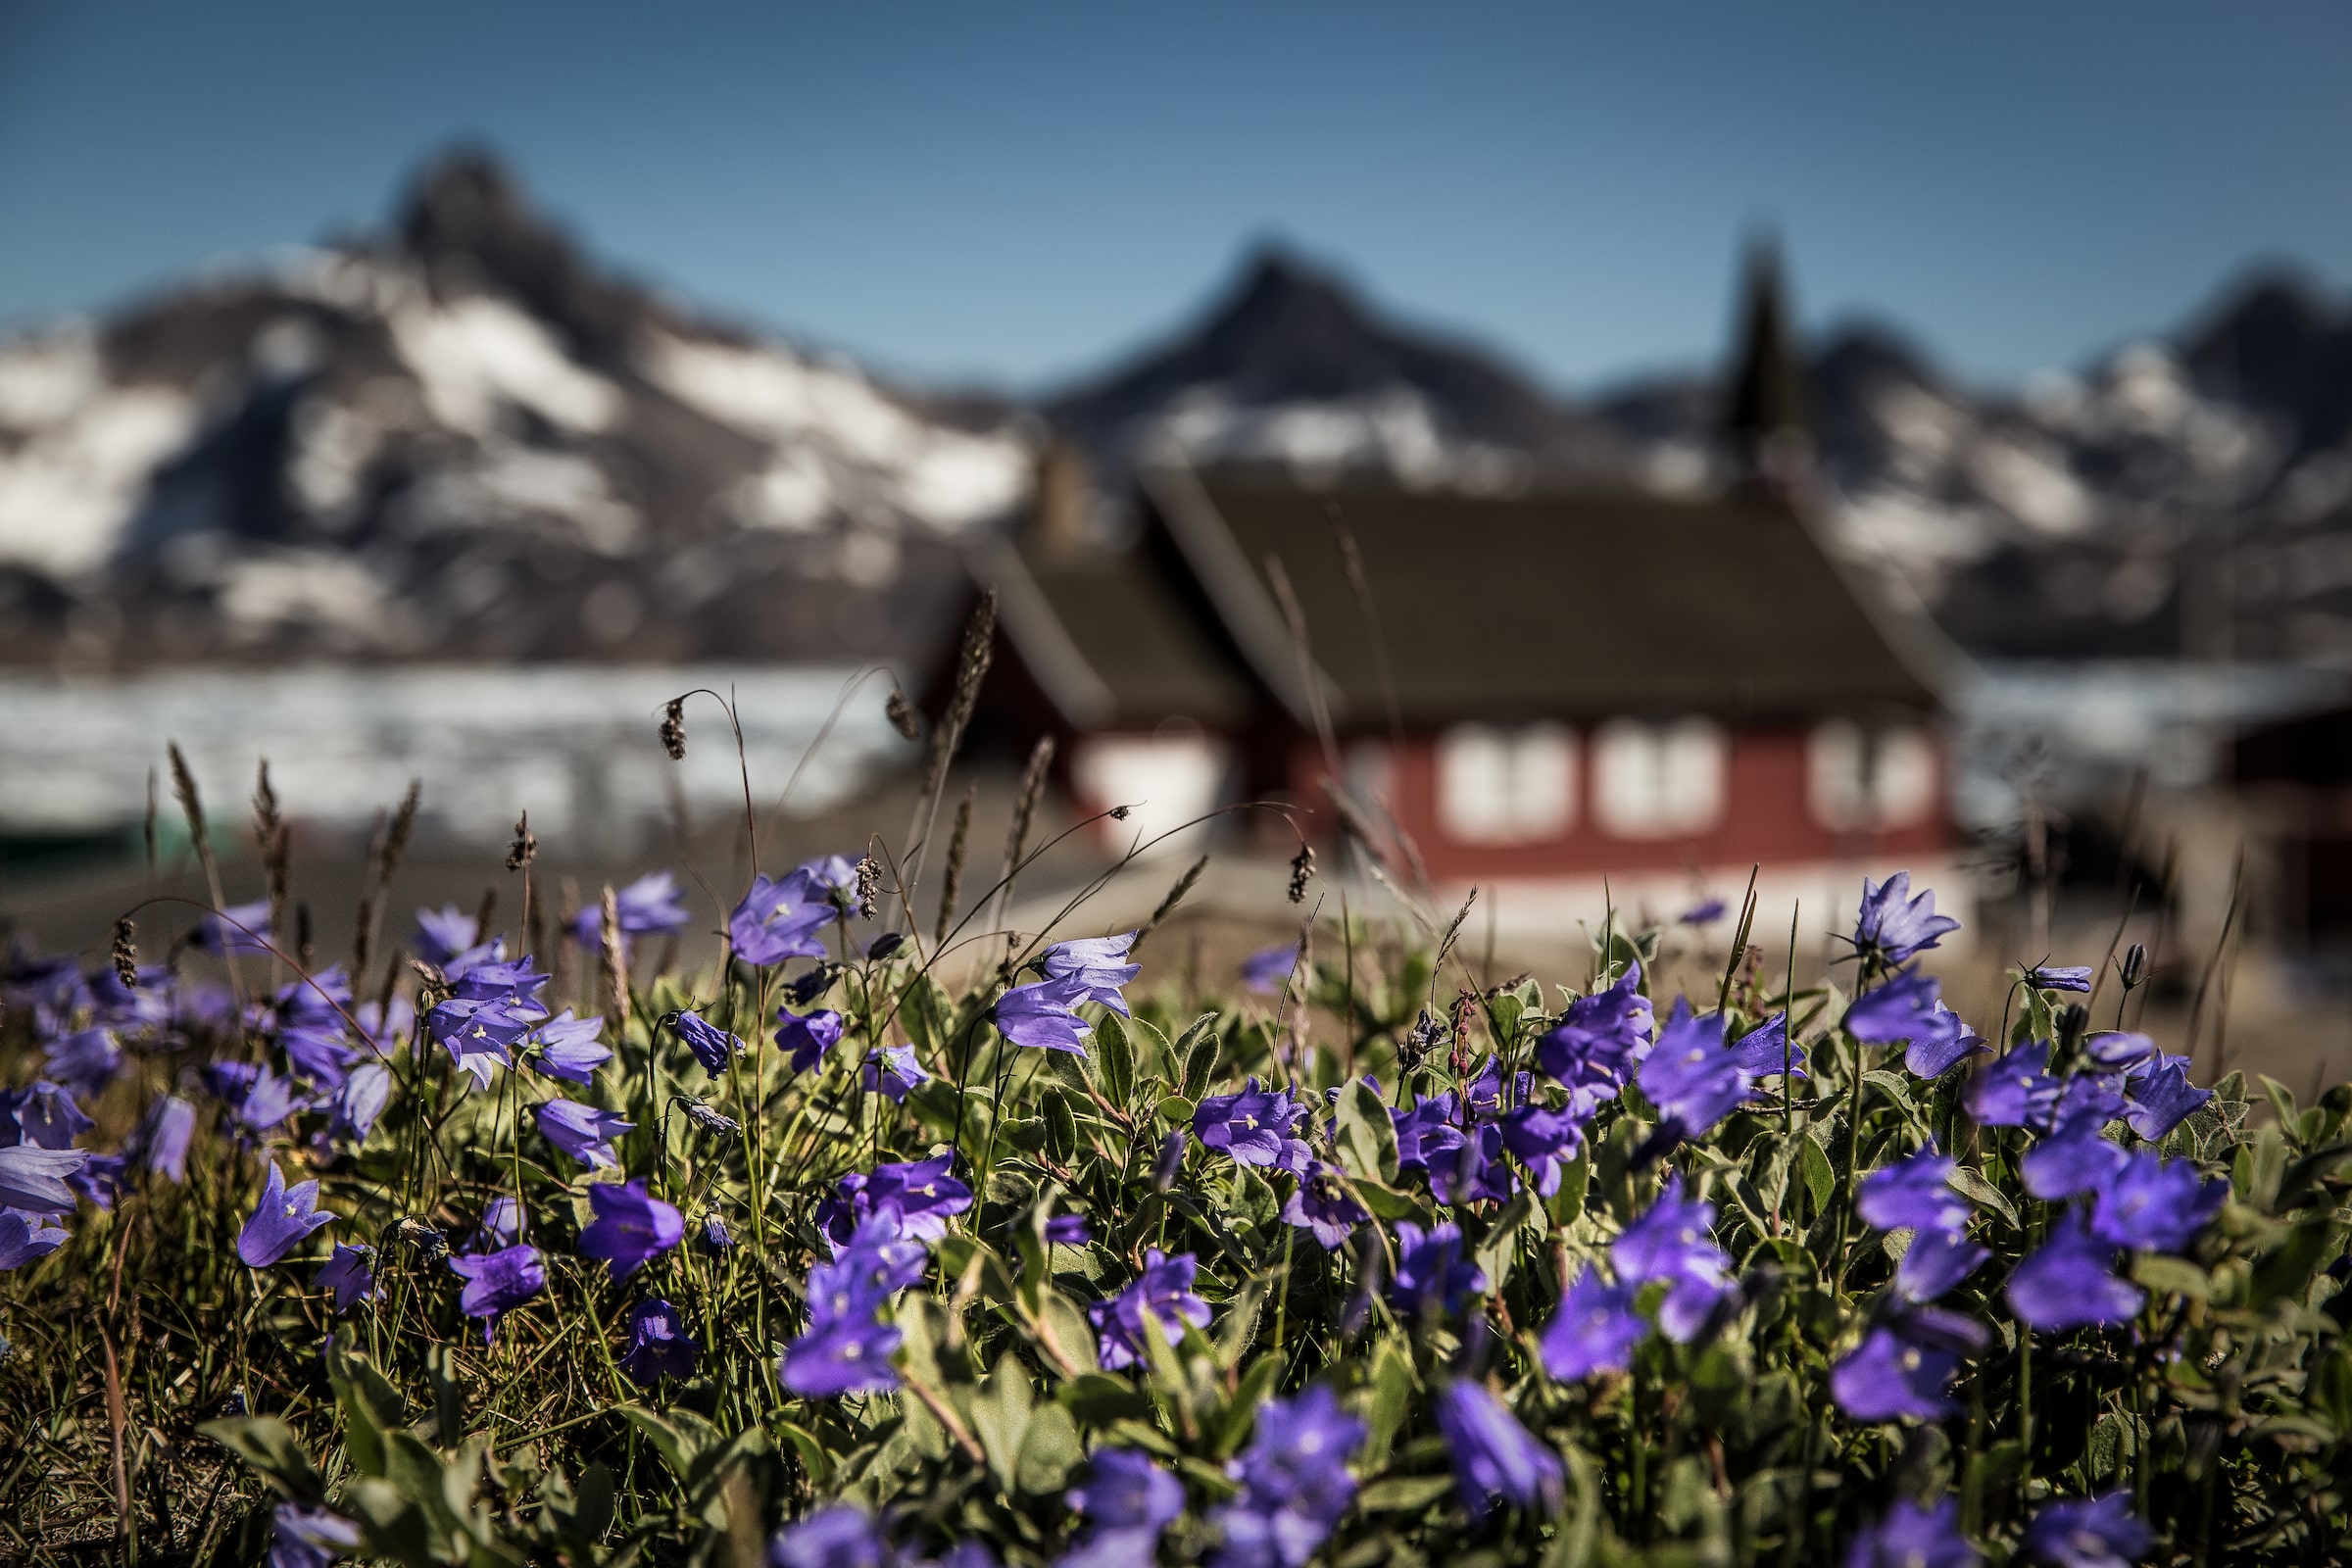 Flowers in Tasiilaq in East Greenland. Photo by Mads Pihl - Visit Greenland